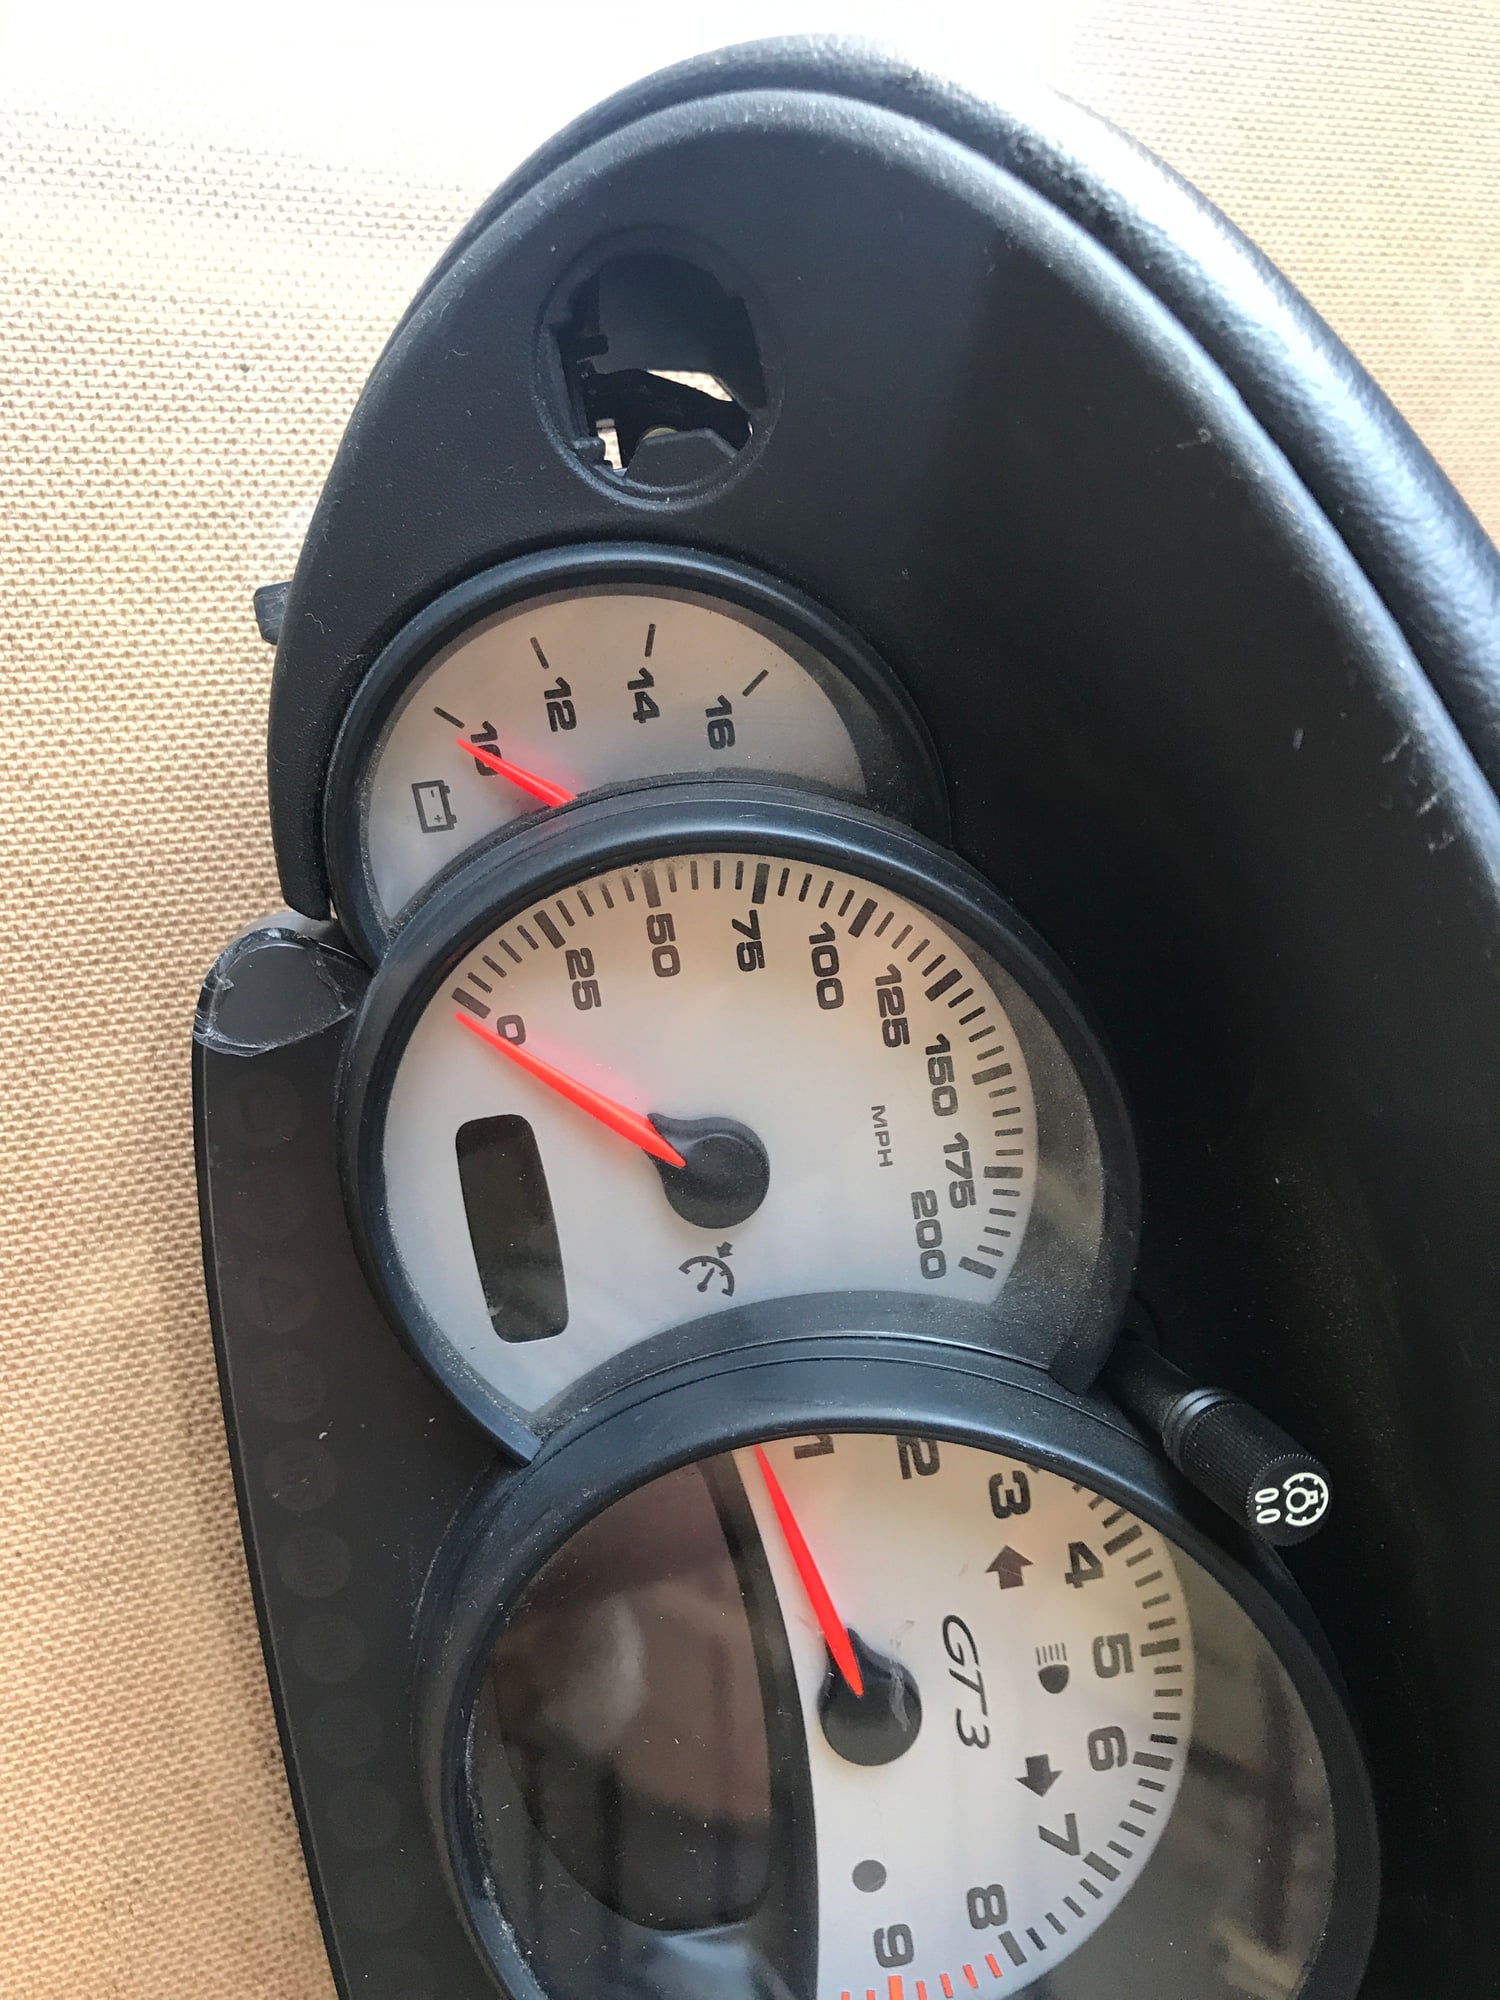 Interior/Upholstery - Porsche 996 GT3 OEM Instrument cluster dash ODO gauges KM/H - made in Germany - Used - 1999 to 2005 Porsche GT3 - West Palm Beach, FL 33411, United States